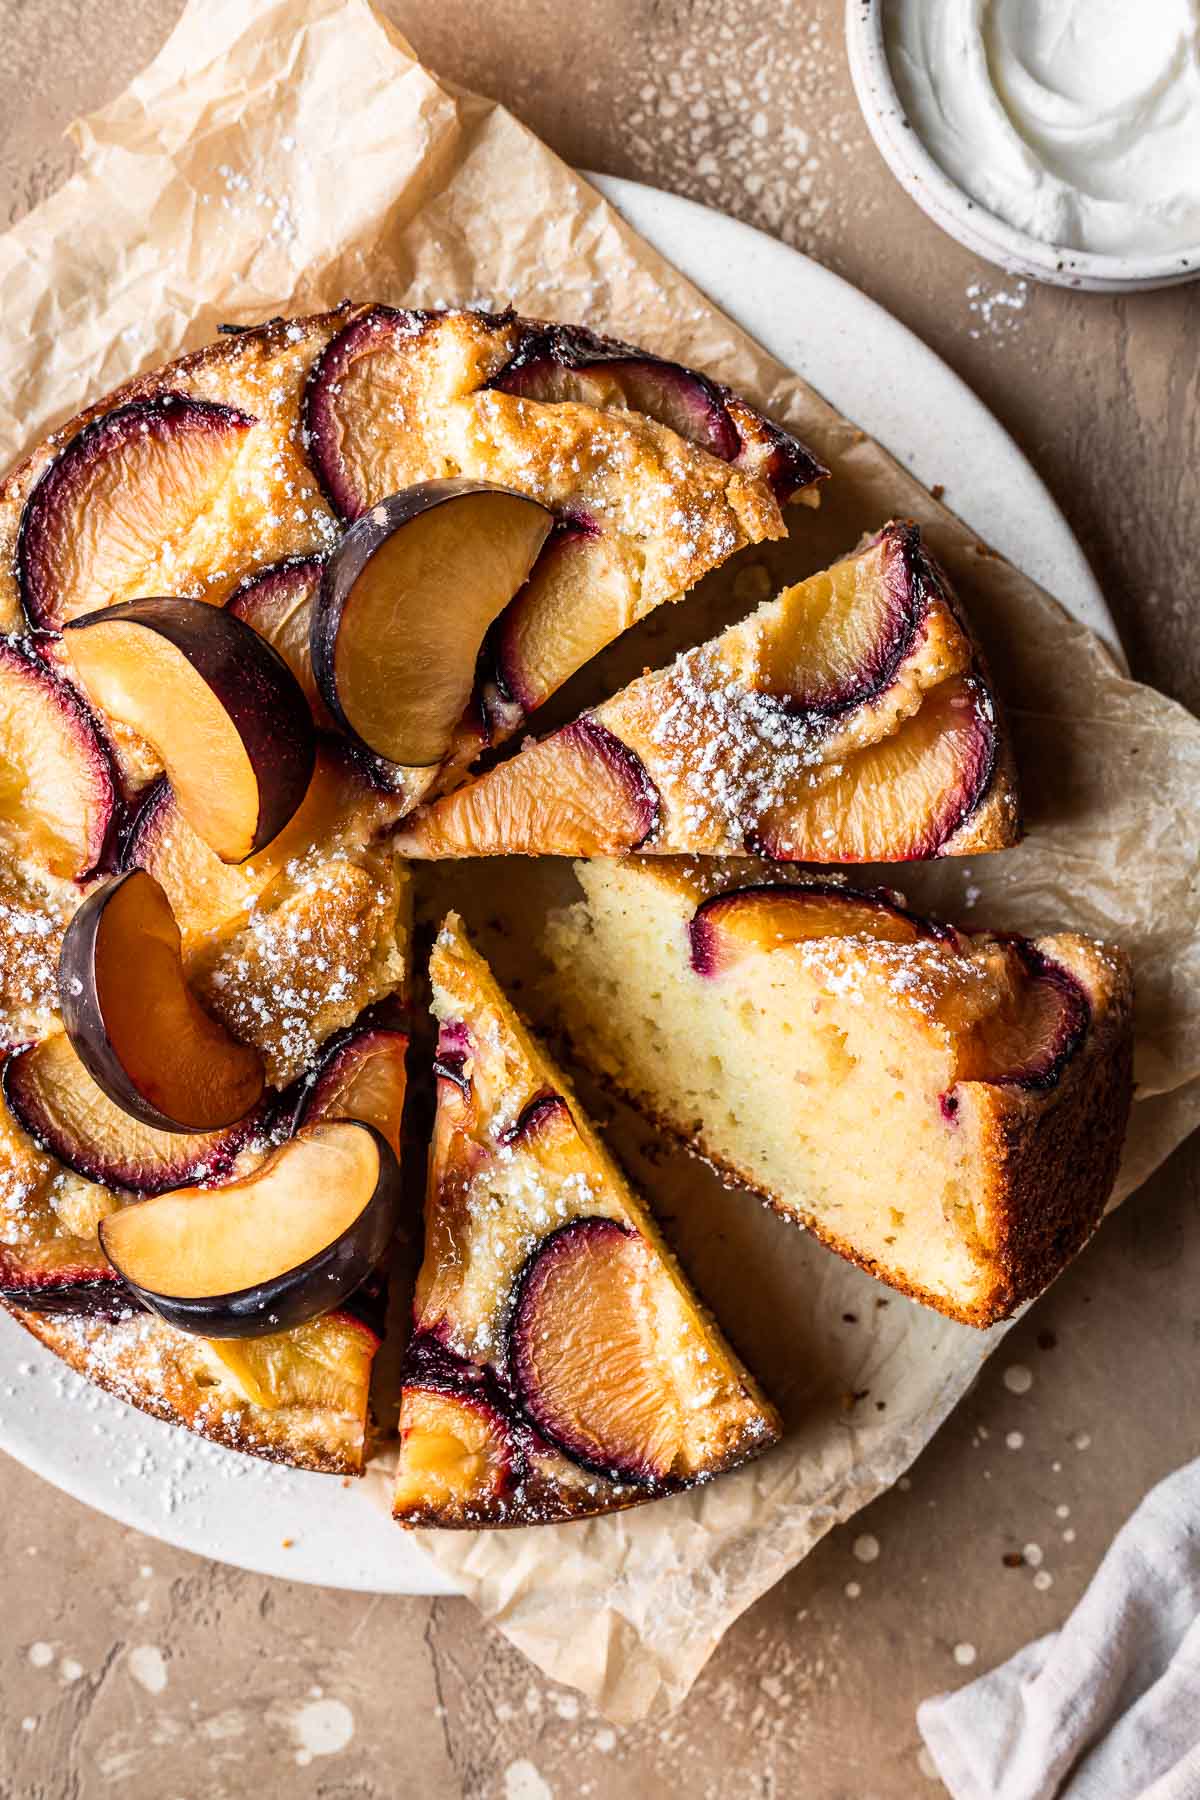 A close up photo of plum cake with several slices cut and turned to the side.